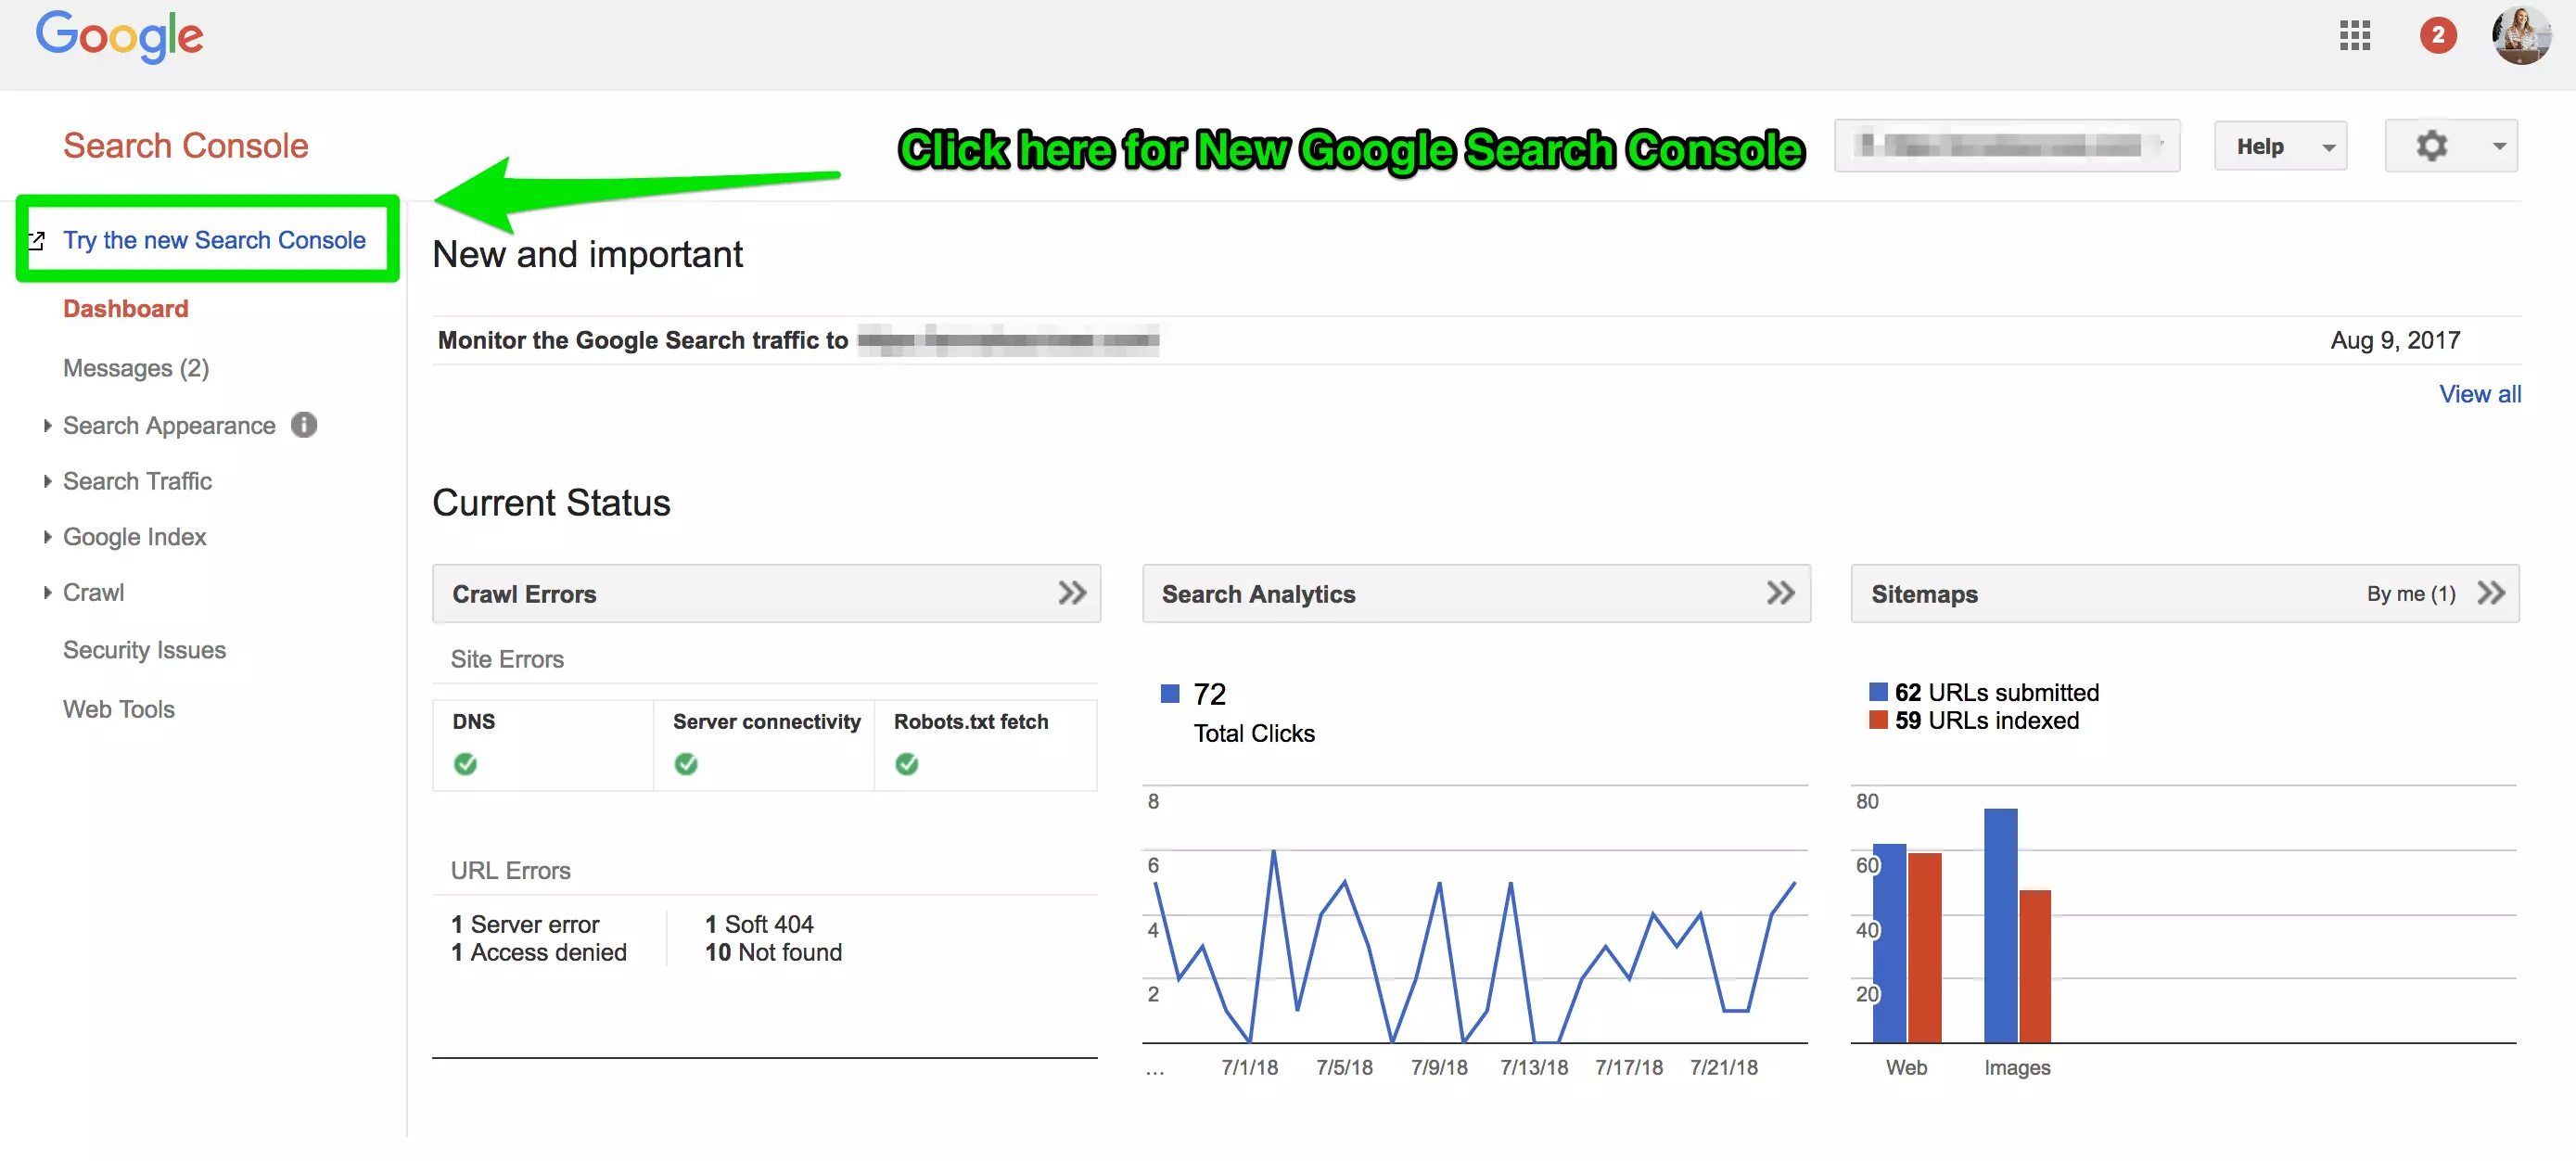 where-to-find-new-google-search-console